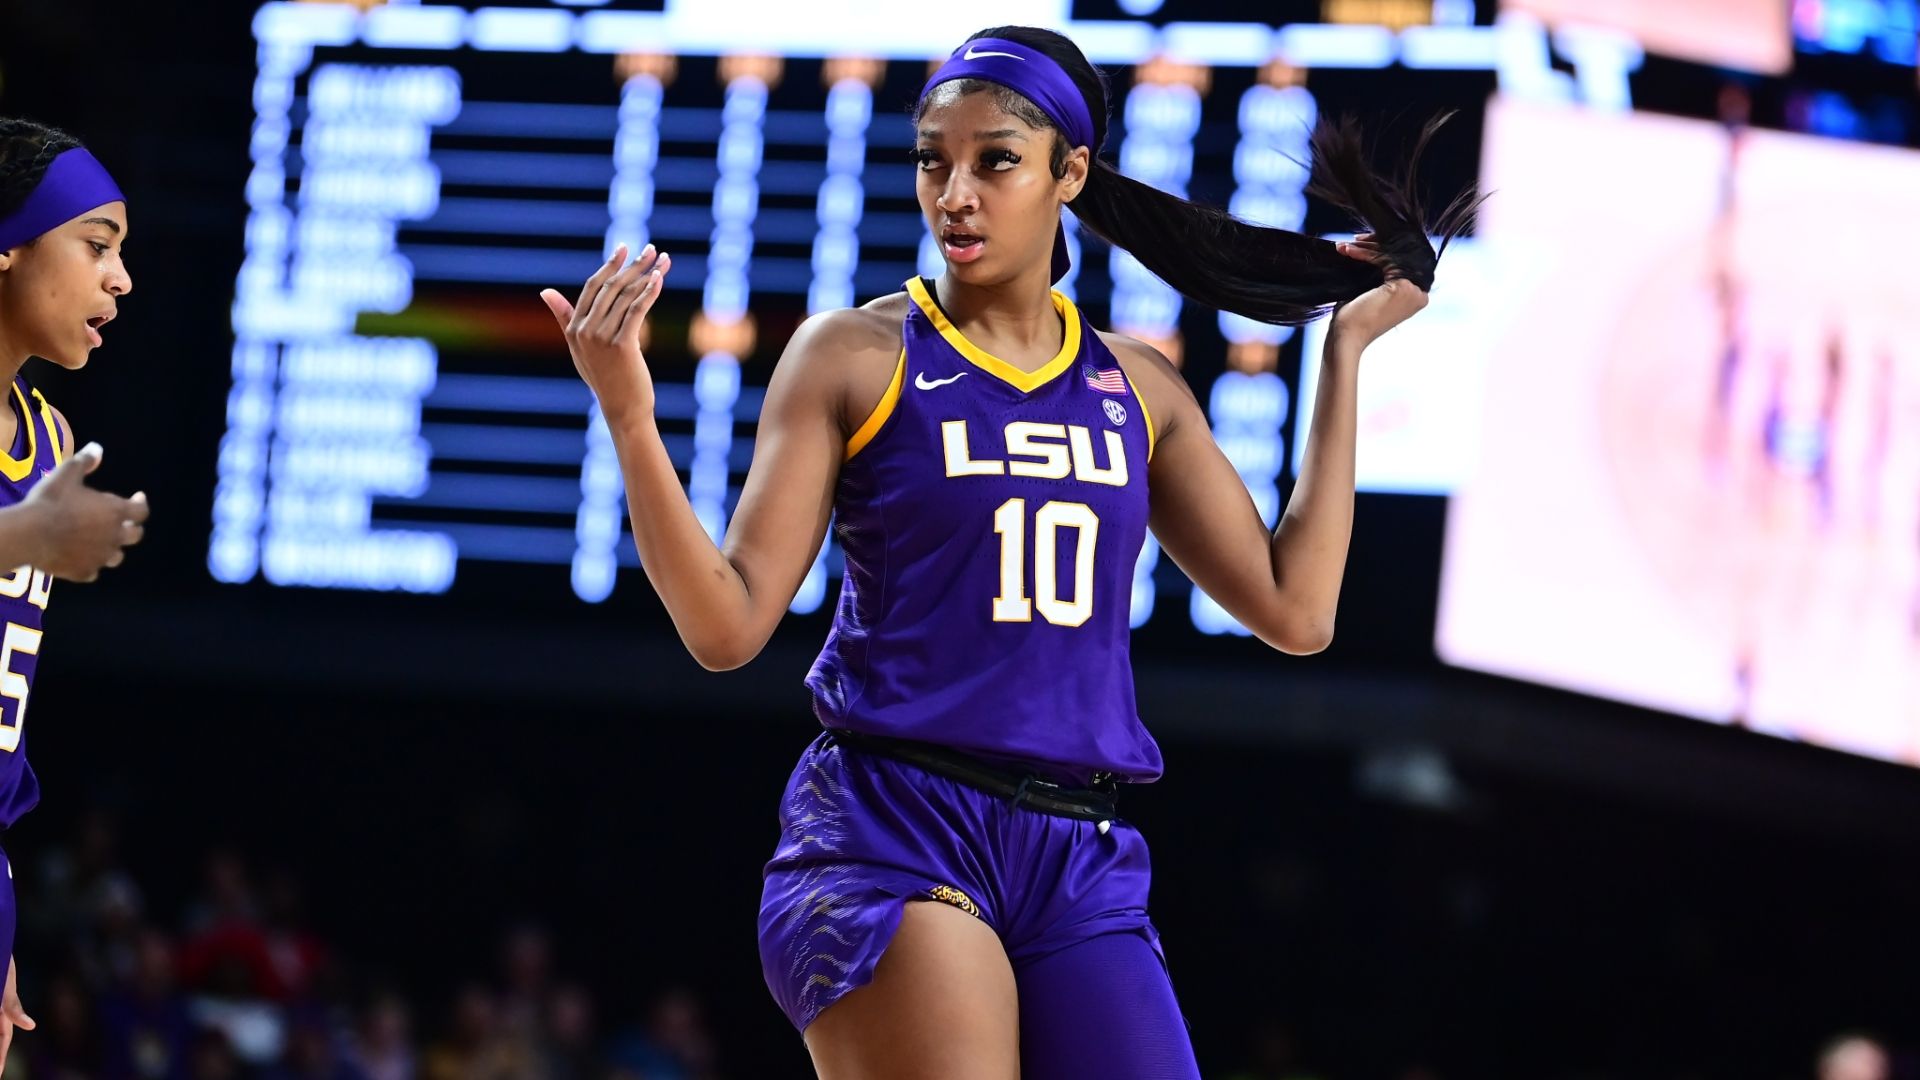 Latest double-double by LSU's Reese overwhelms Vandy